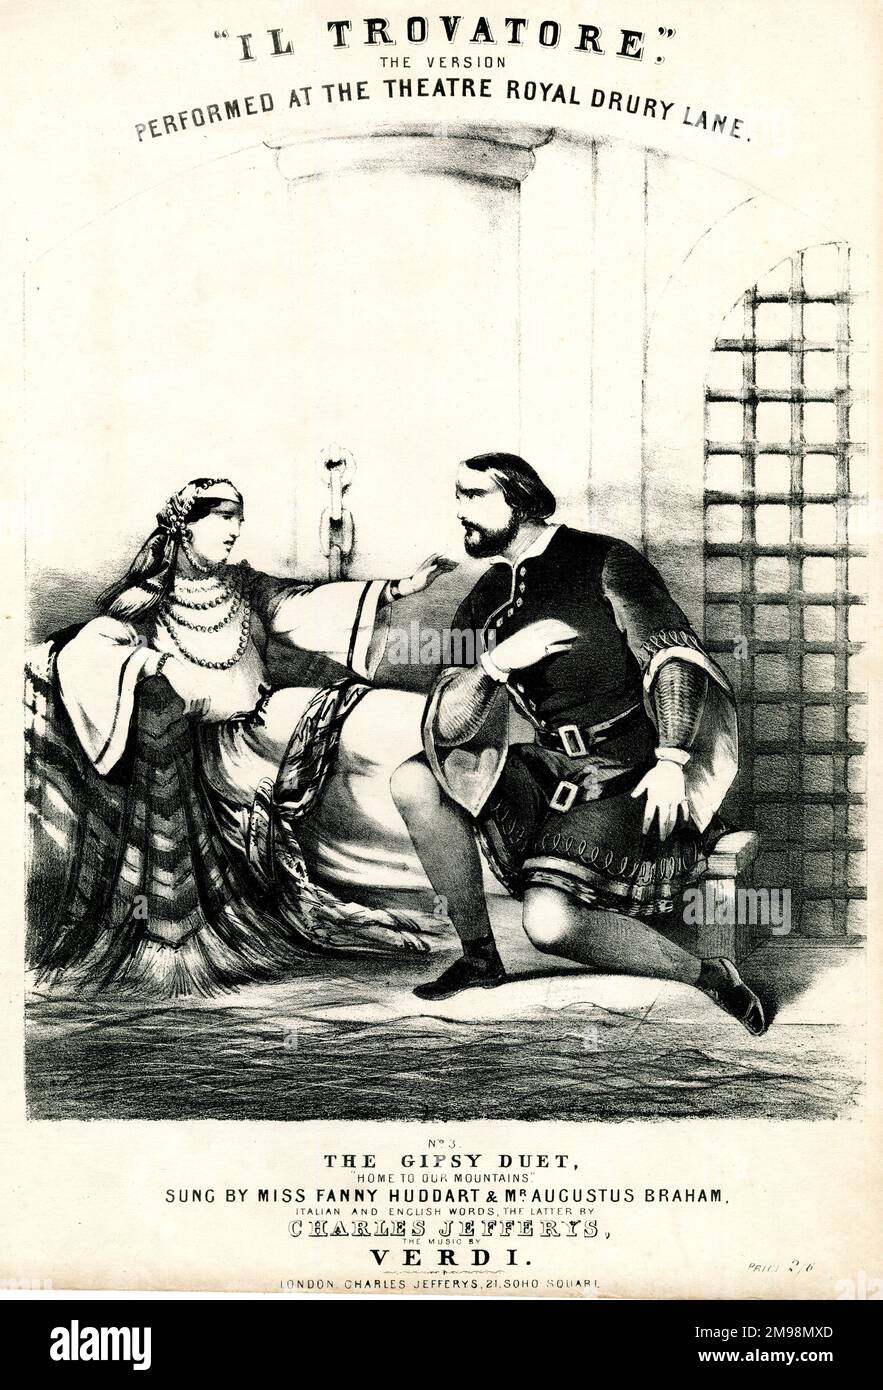 Music cover, The Gipsy Duet from Il Trovatore, opera by Verdi, in the version performed at the Theatre Royal, Drury Lane, London. Sung by Fanny Huddart and Augustus Braham. Stock Photo